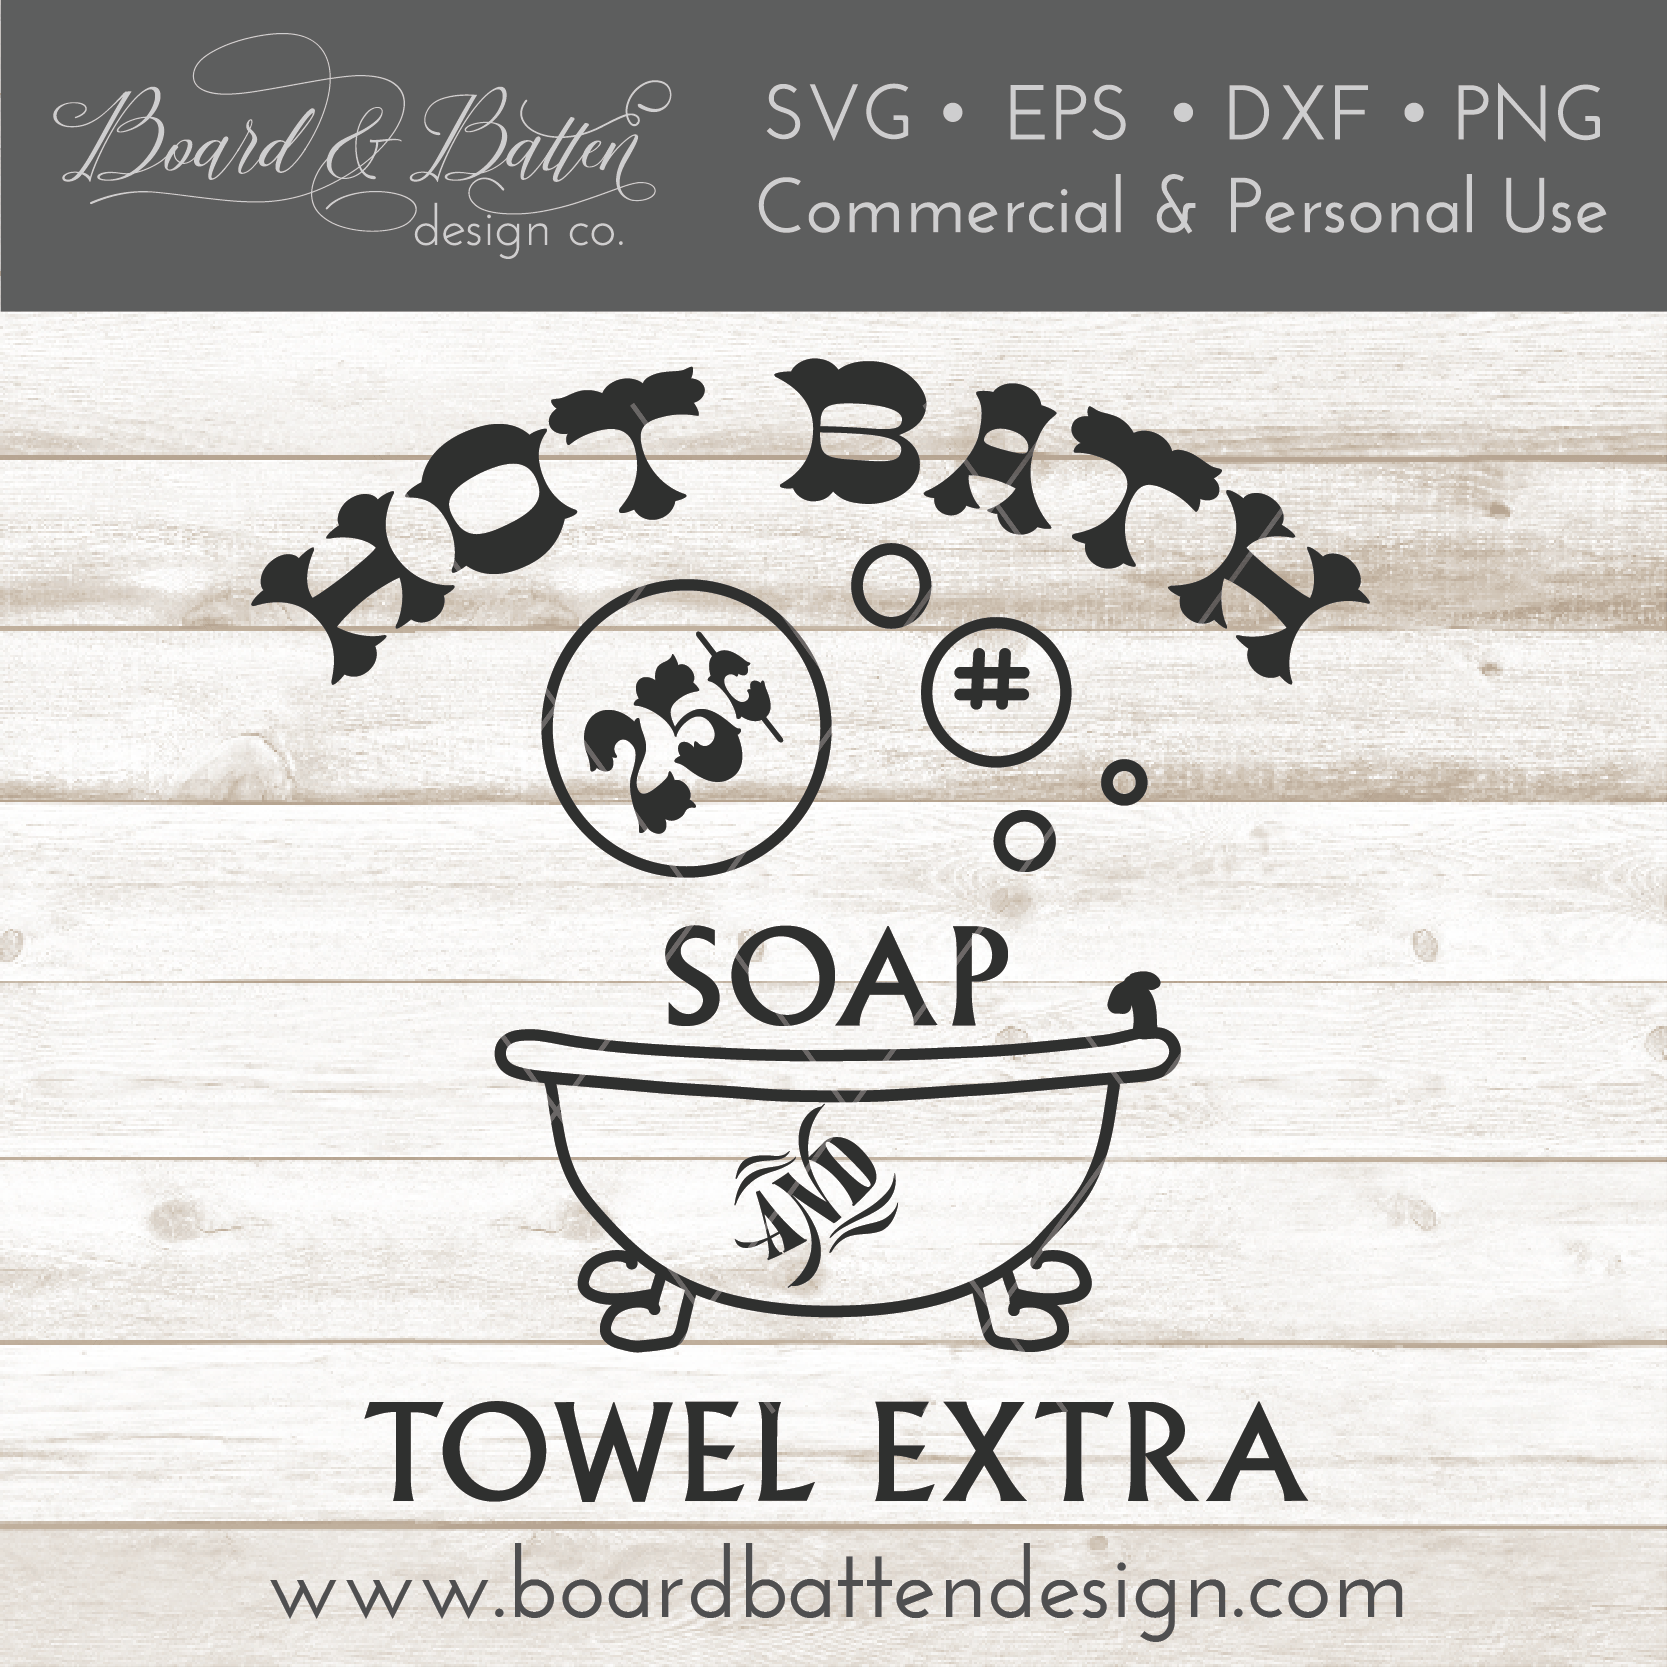 Hot Bath SVG File - Commercial Use SVG Files for Cricut & Silhouette